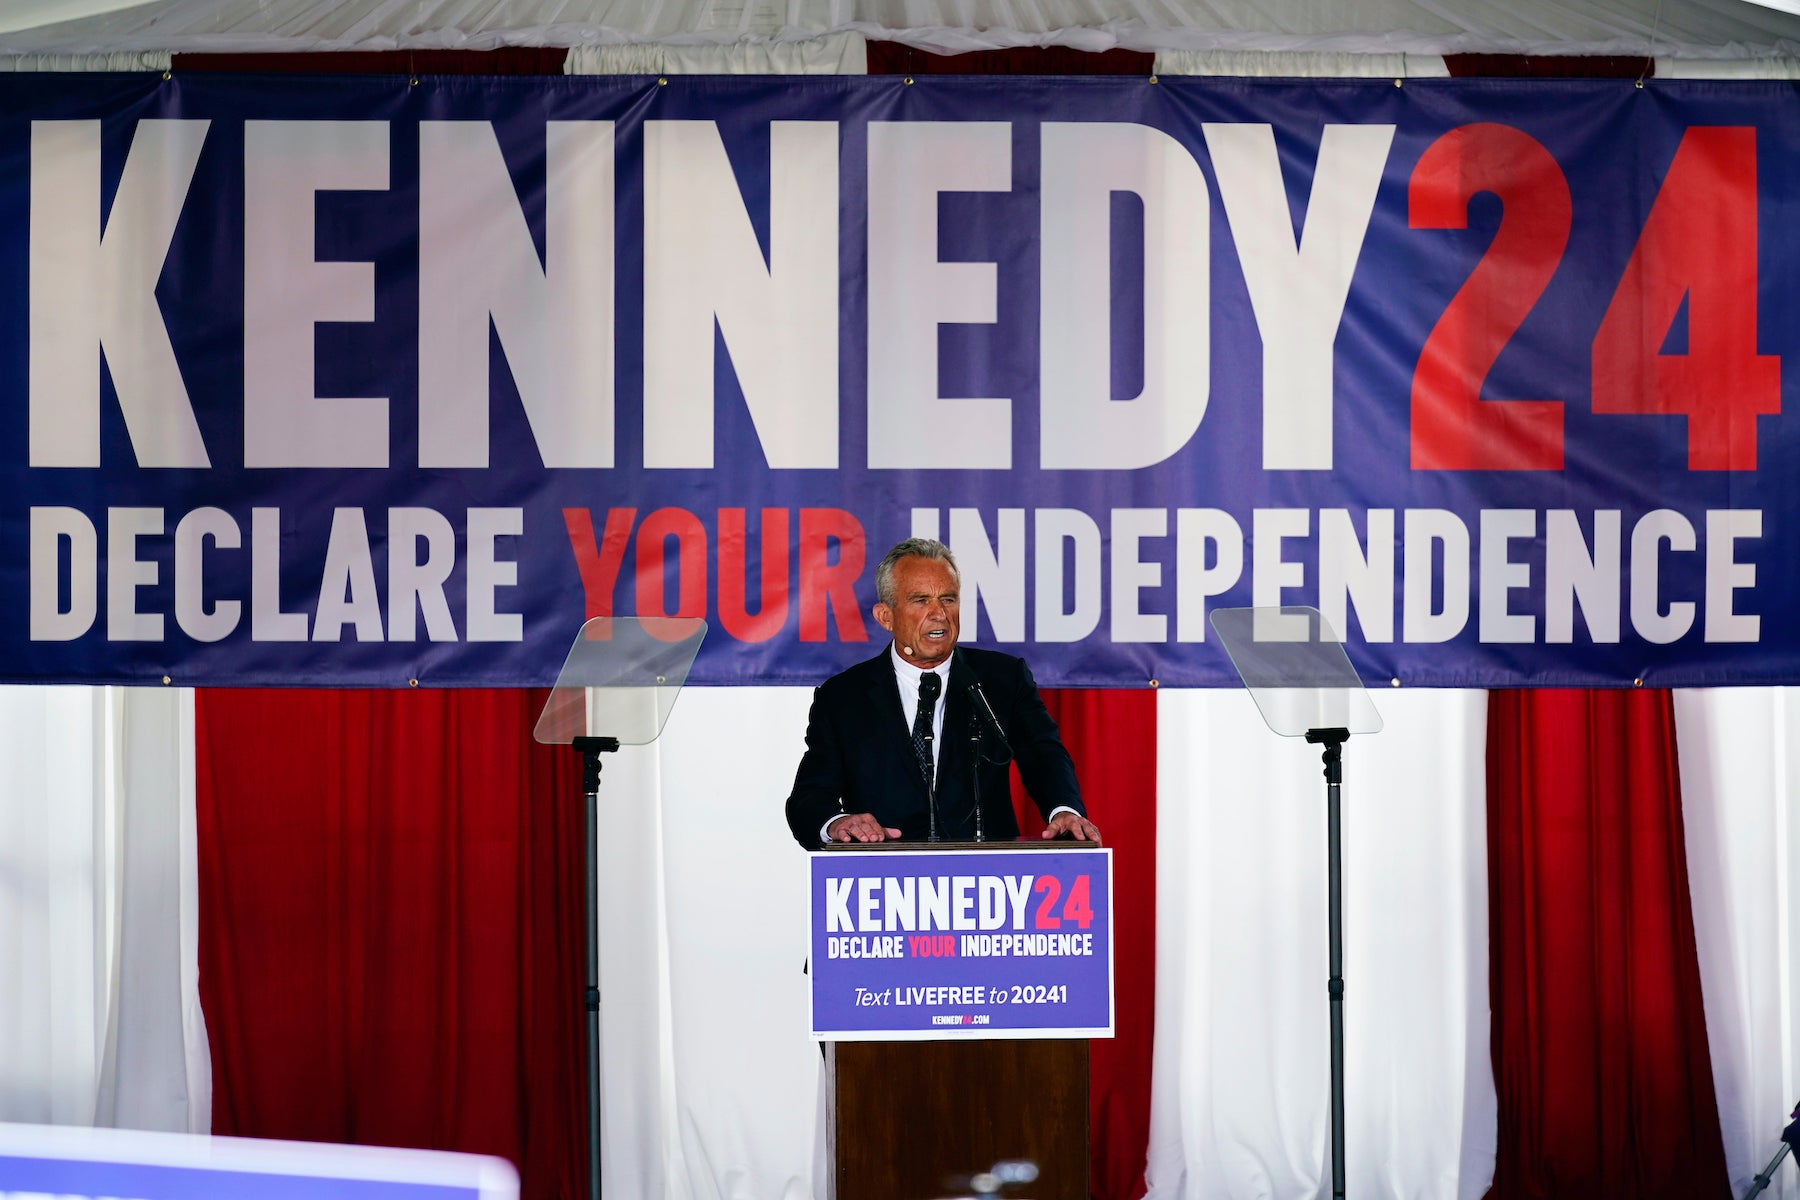 RFK Jr. launches independent presidential campaign in Philly WHYY